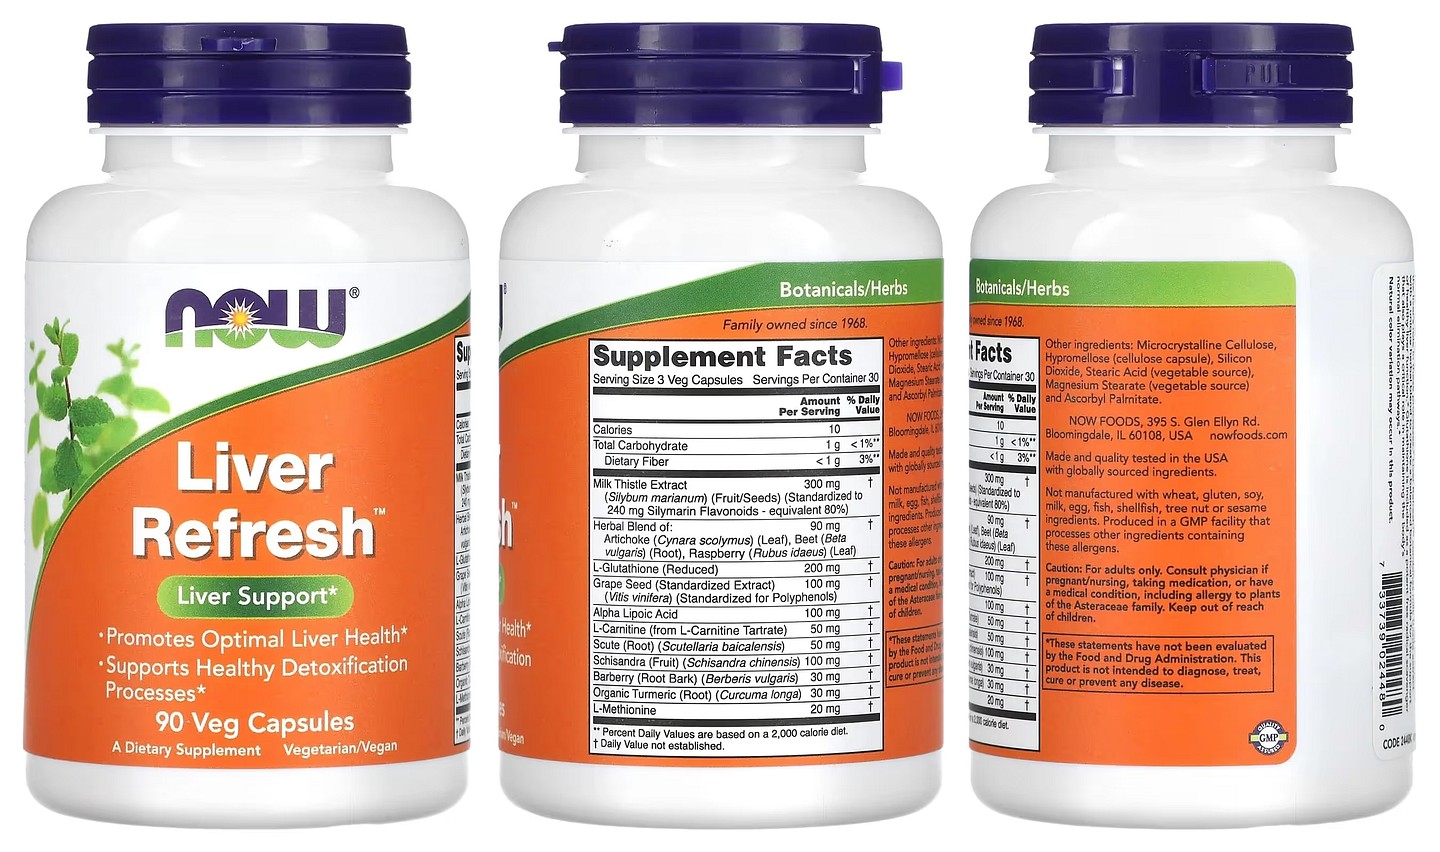 NOW Foods, Liver Refresh packaging